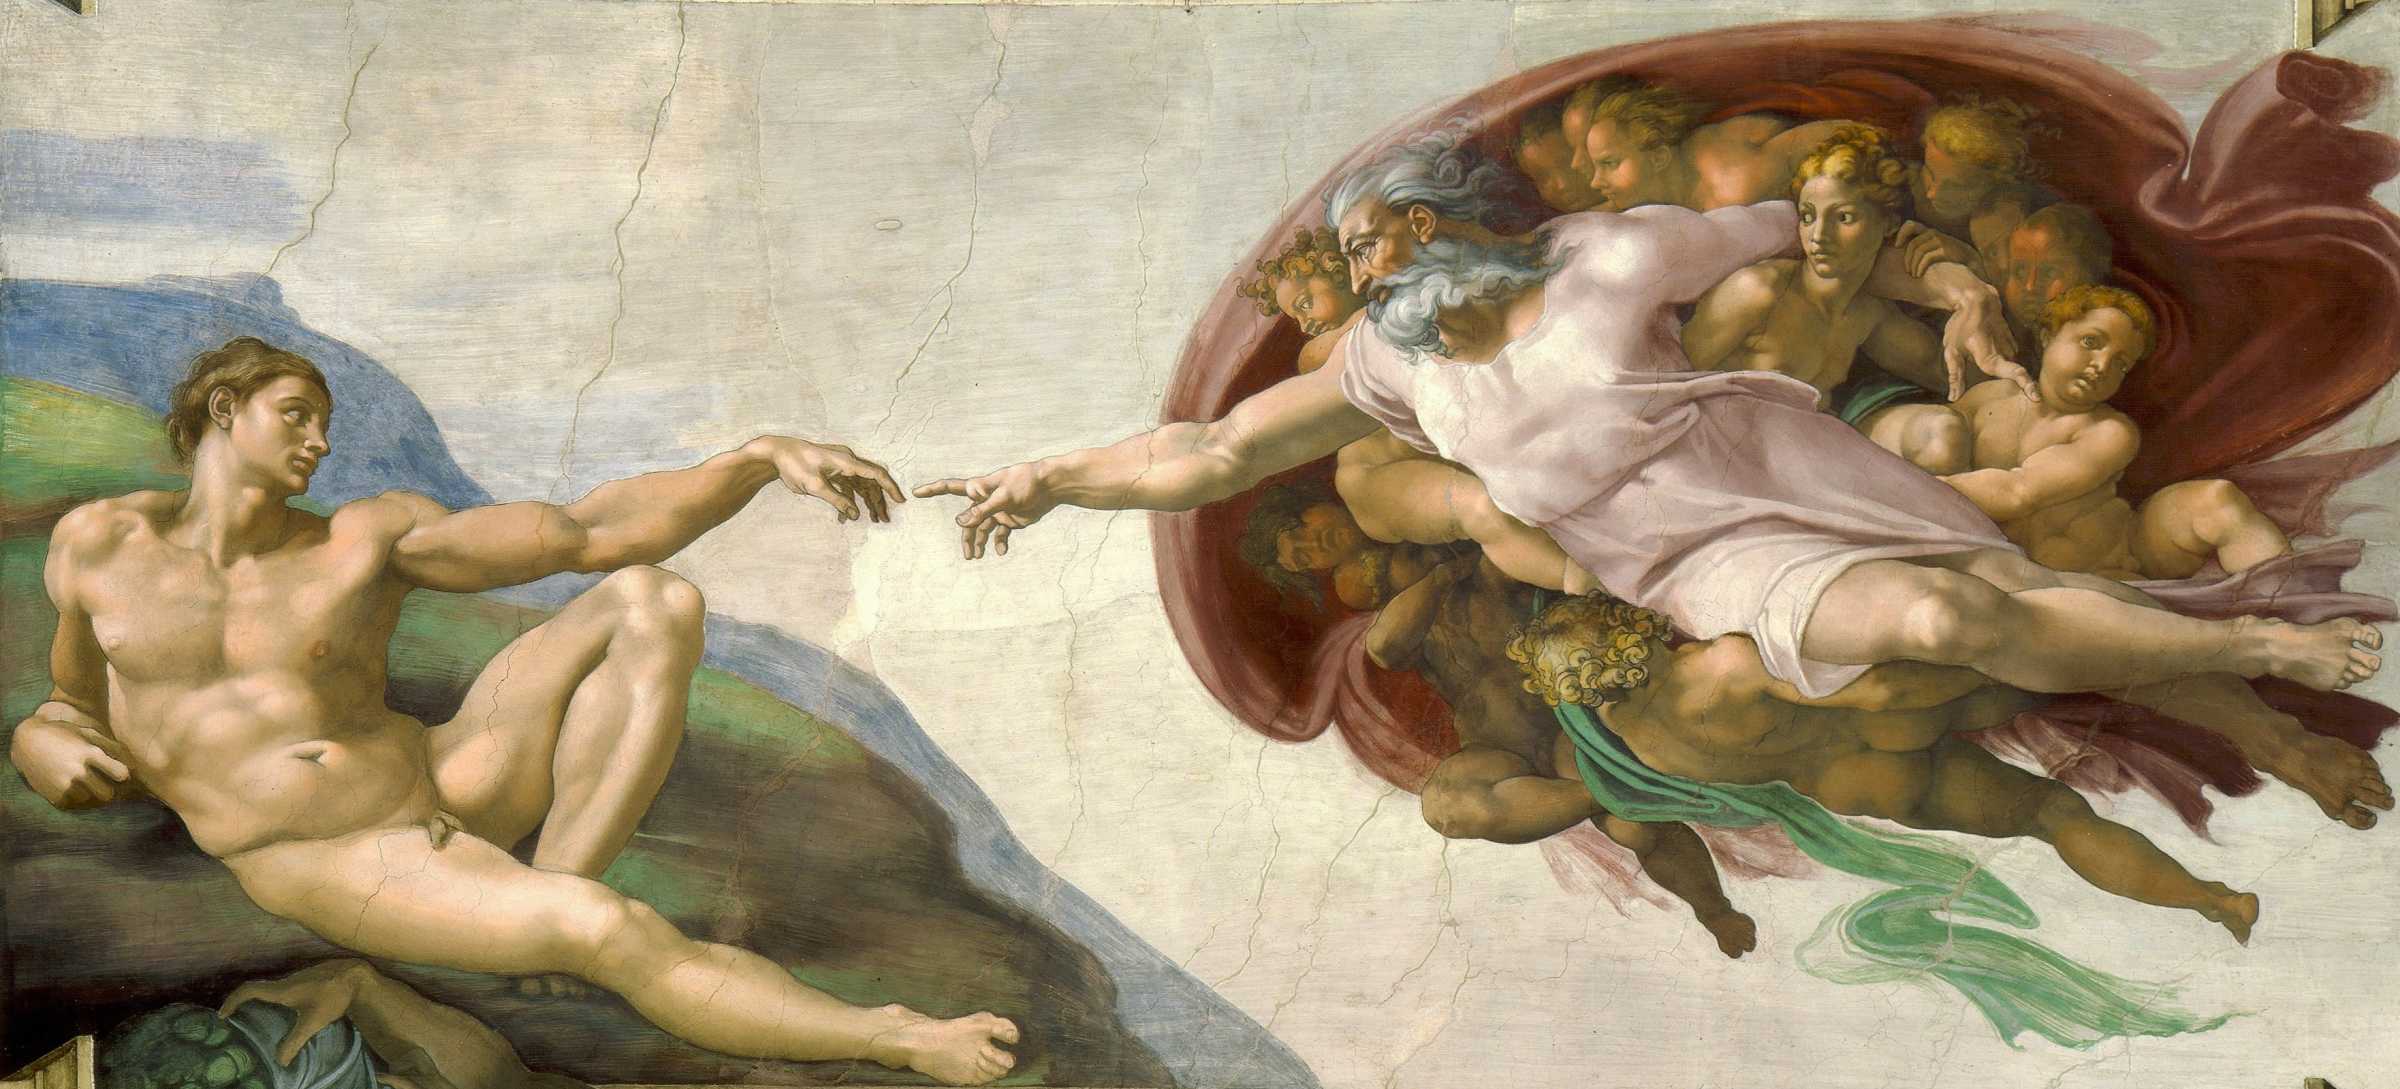 The Creation of Adam is a fresco painting by Italian artist Michelangelo, which forms part of the Sistine Chapel's ceiling.